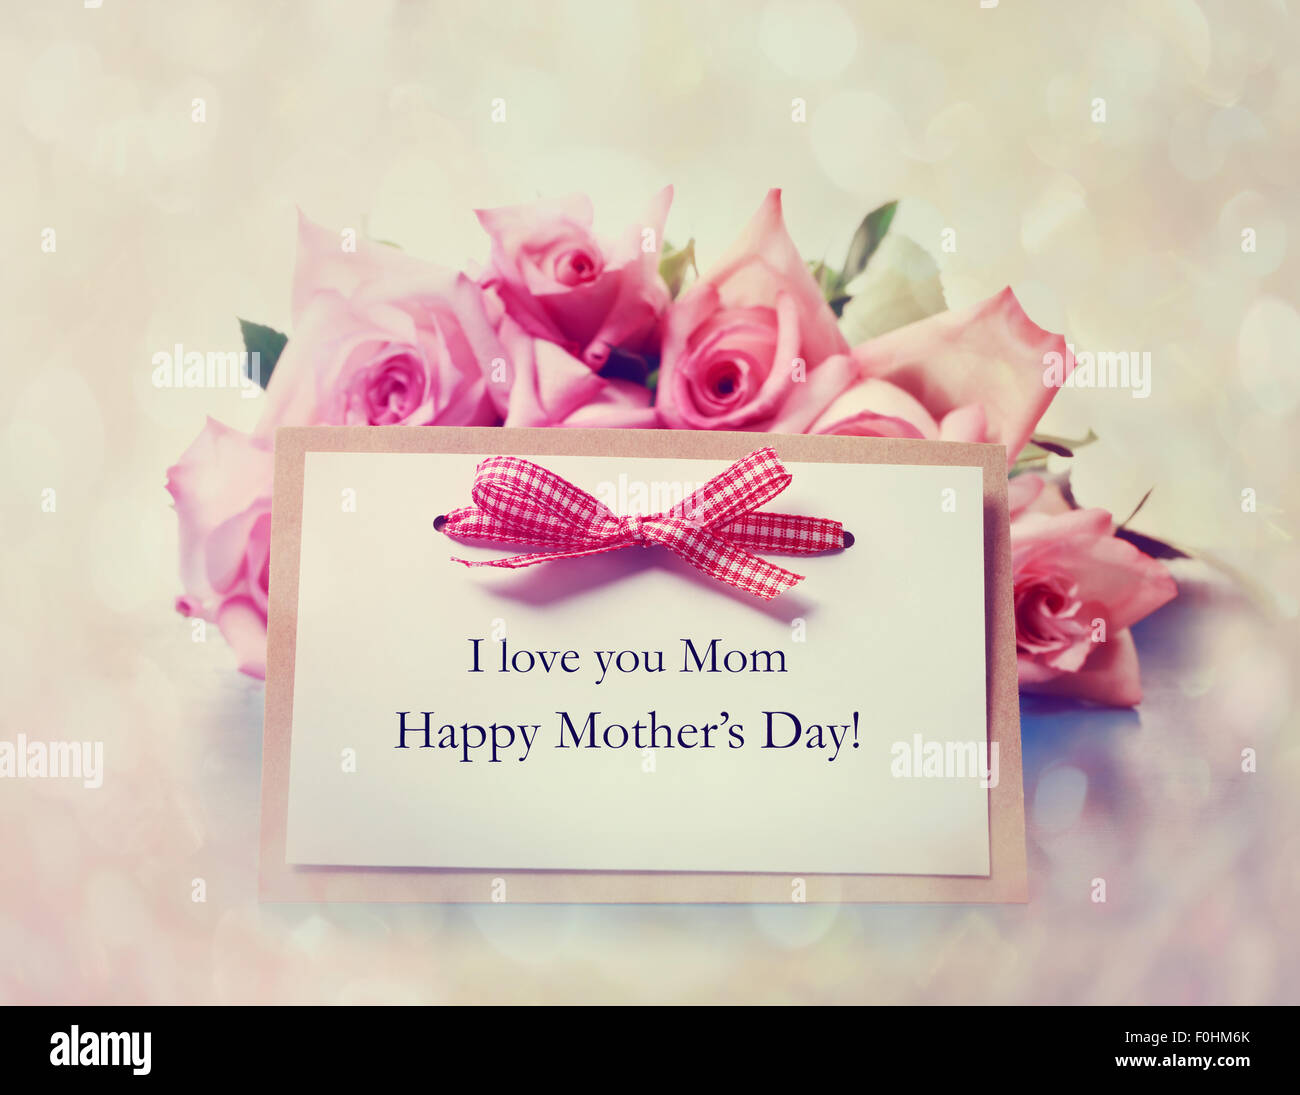 Handmade Mothers Day Greeting Card With Pink Roses Stock Photo Alamy,Diy Ikea Platform Bed With Storage